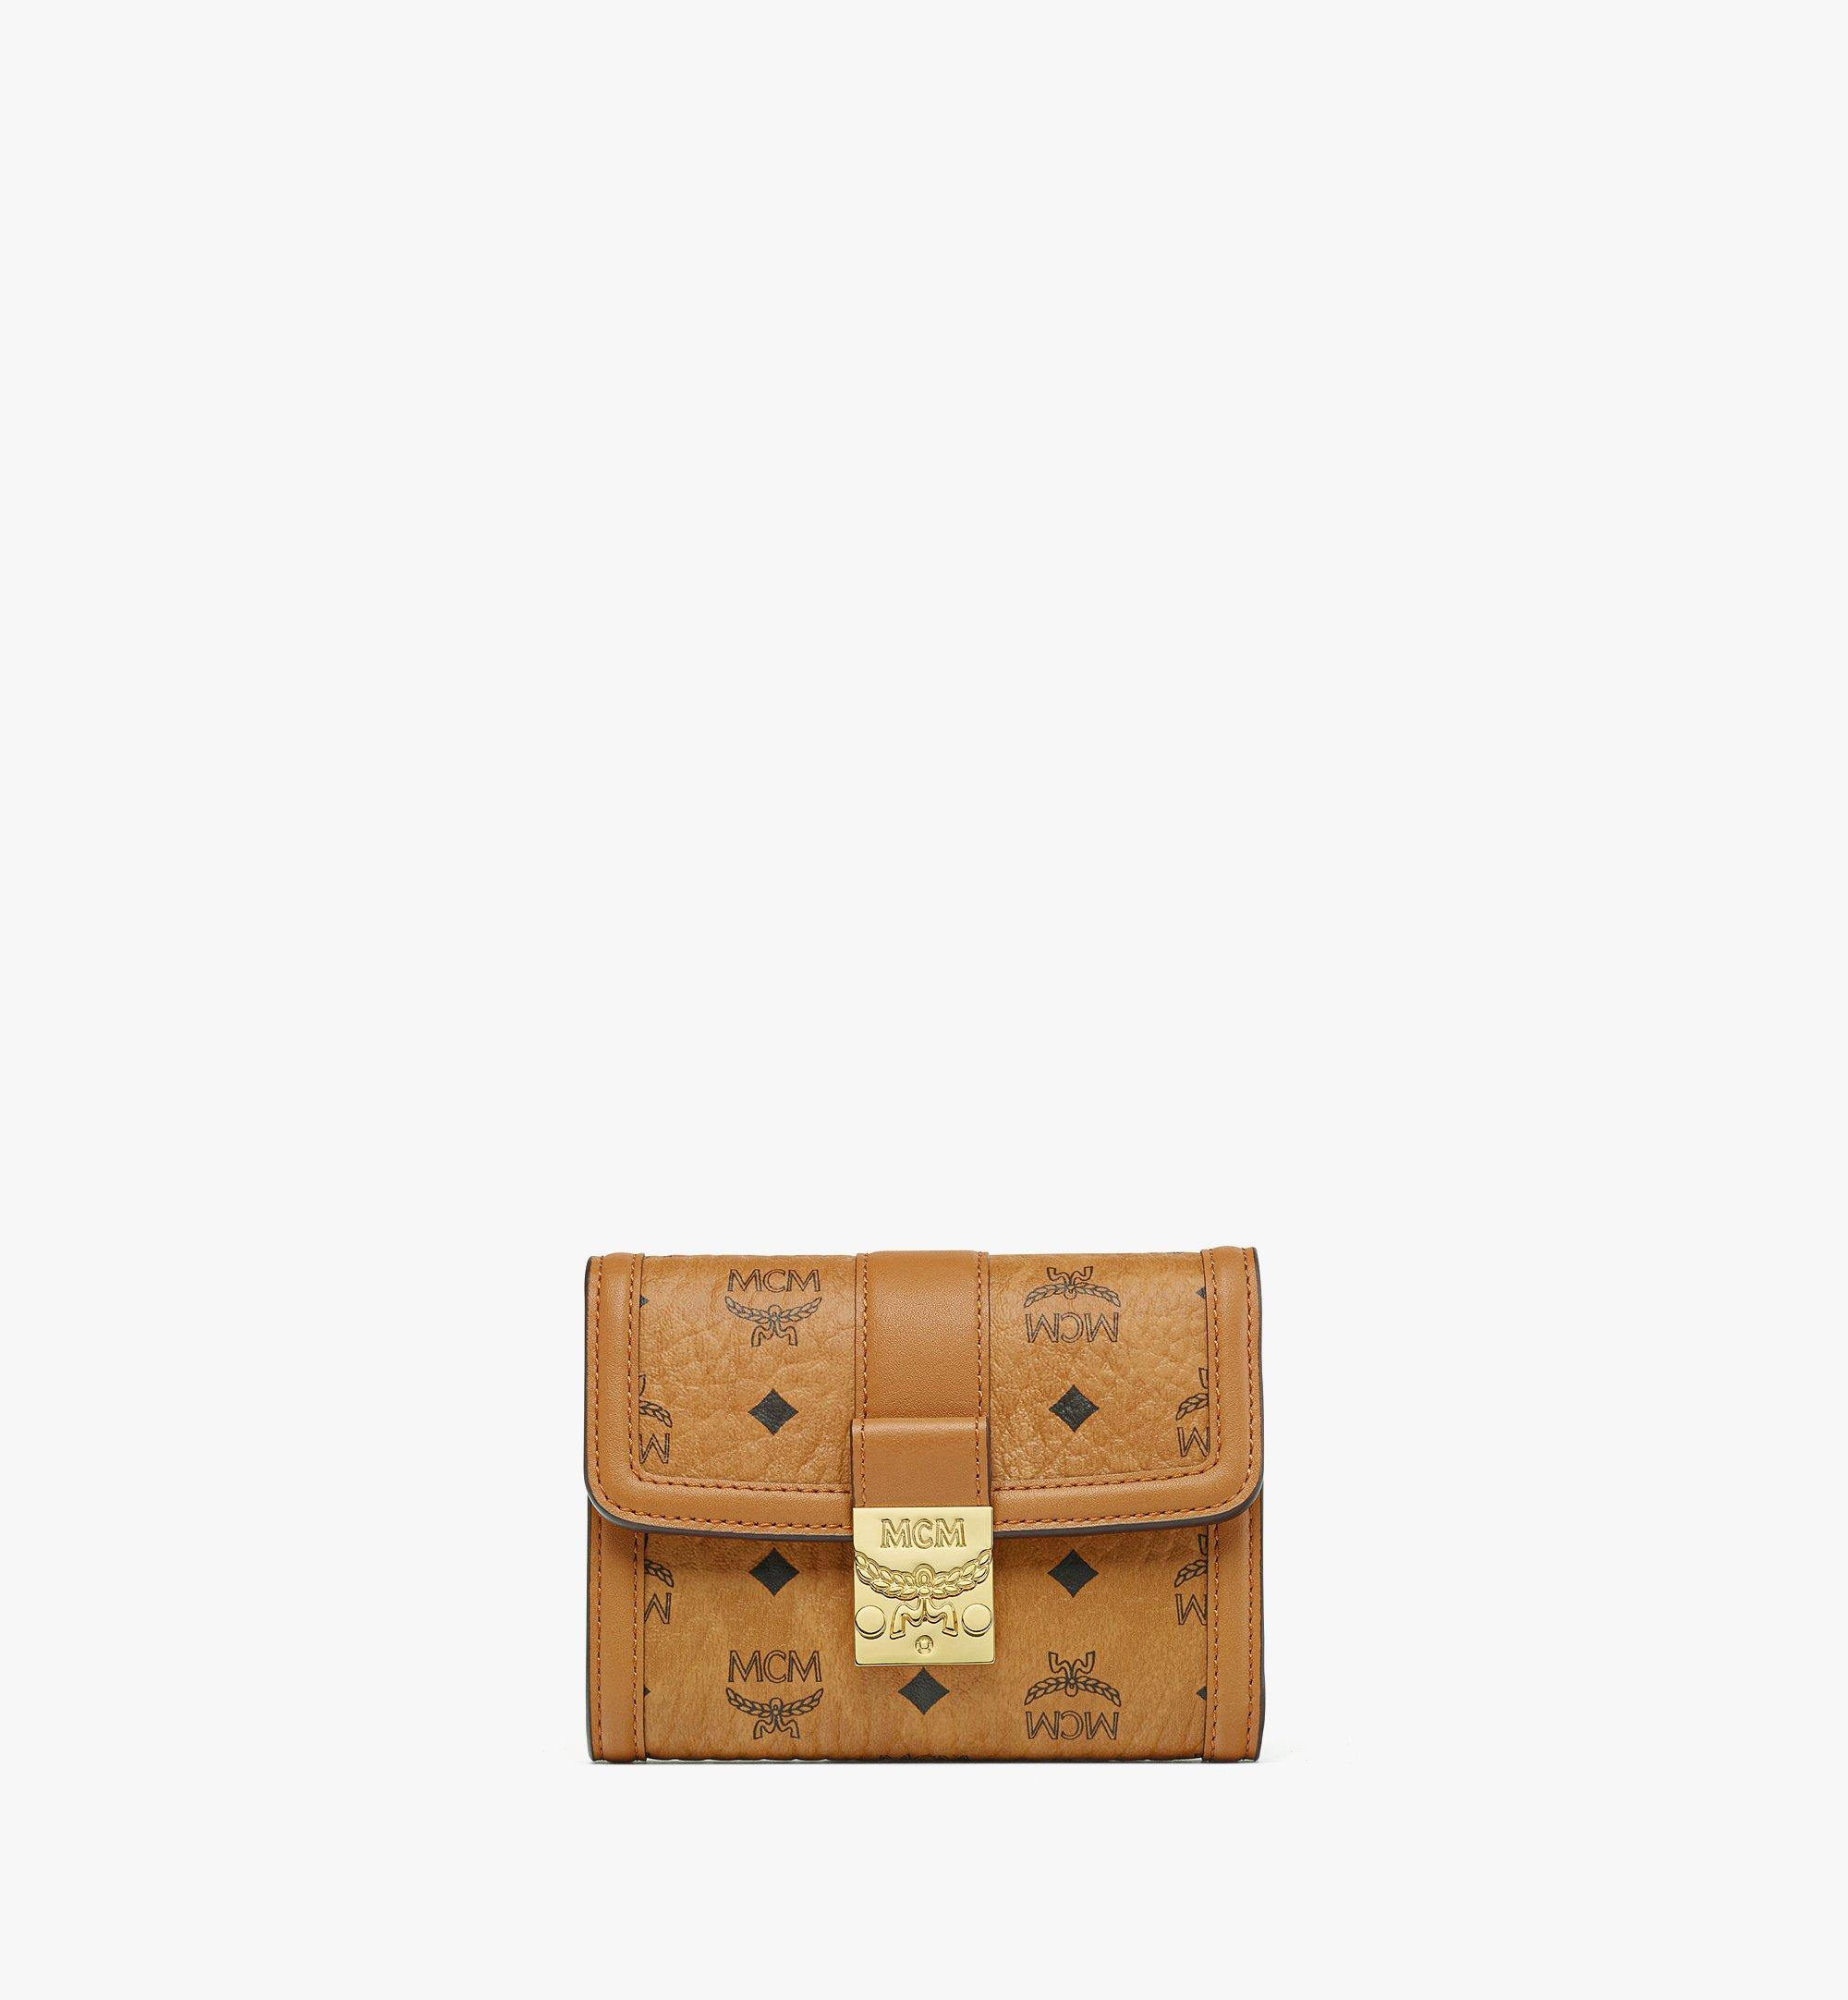 MCM Tracy Trifold Wallet in Visetos